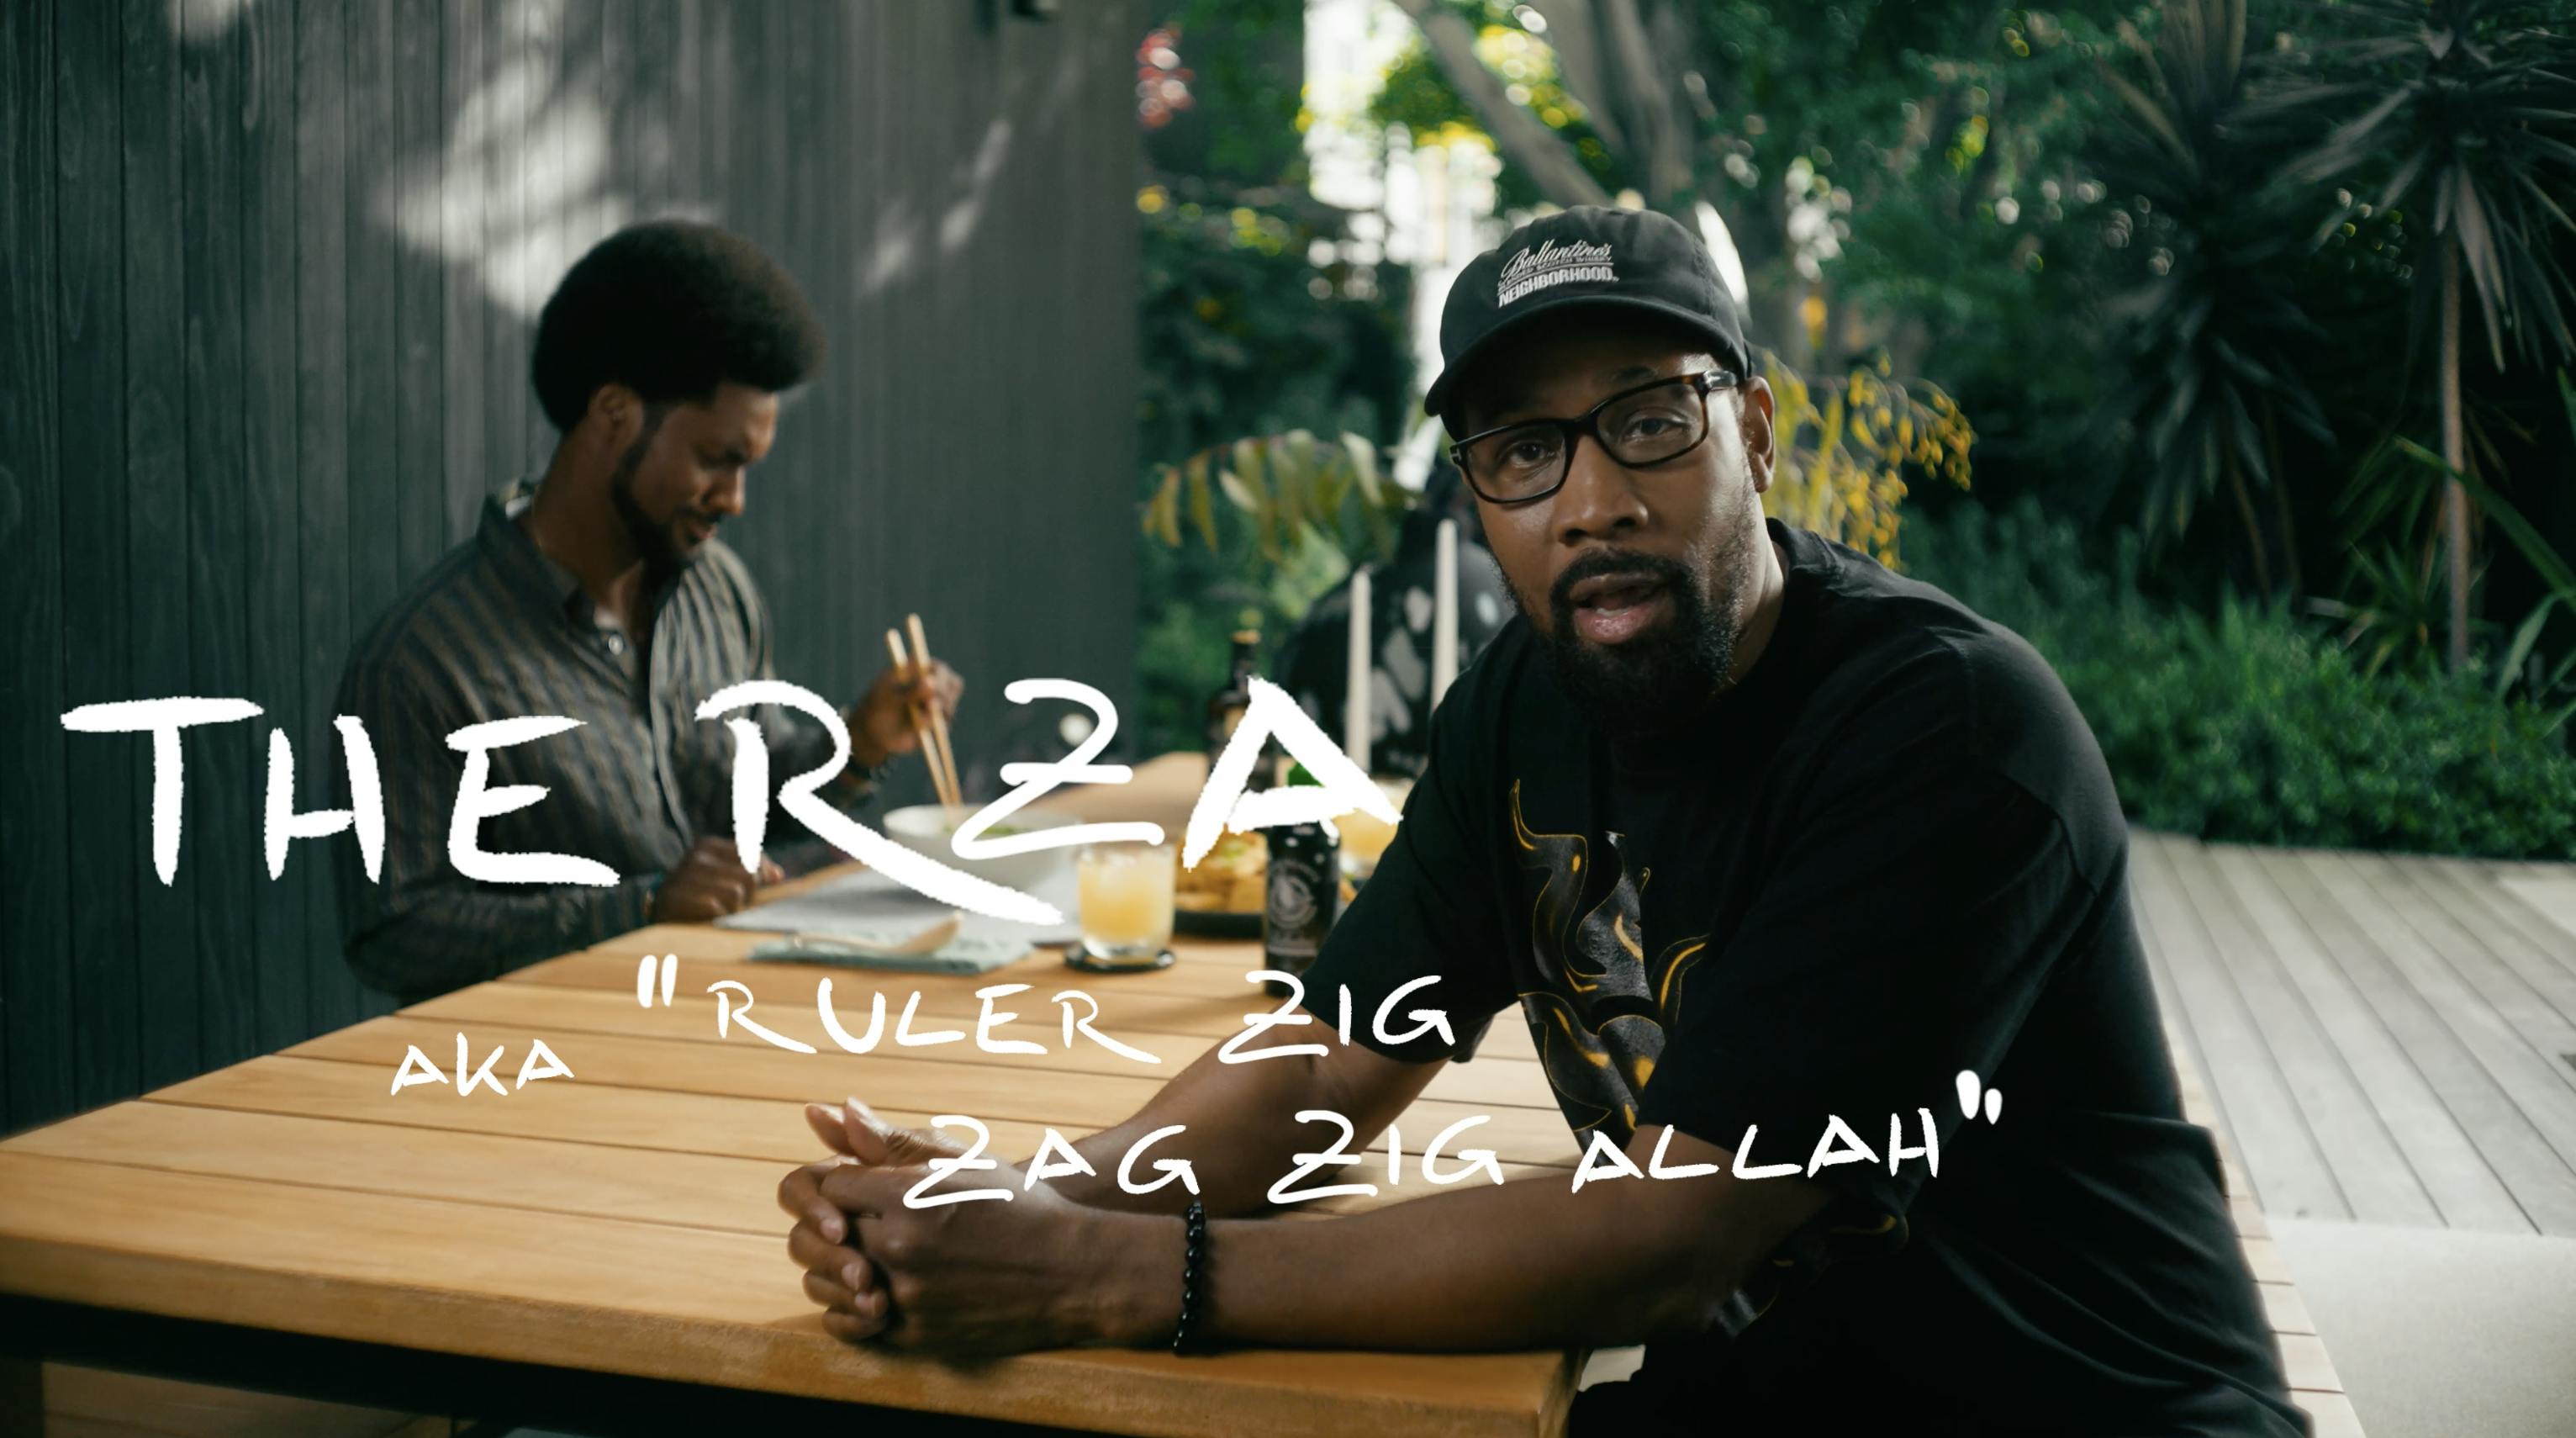 A man (RZA) looks into the camera with the text "The RZA A.K.A "Ruler Zig Zag Zig Allah"